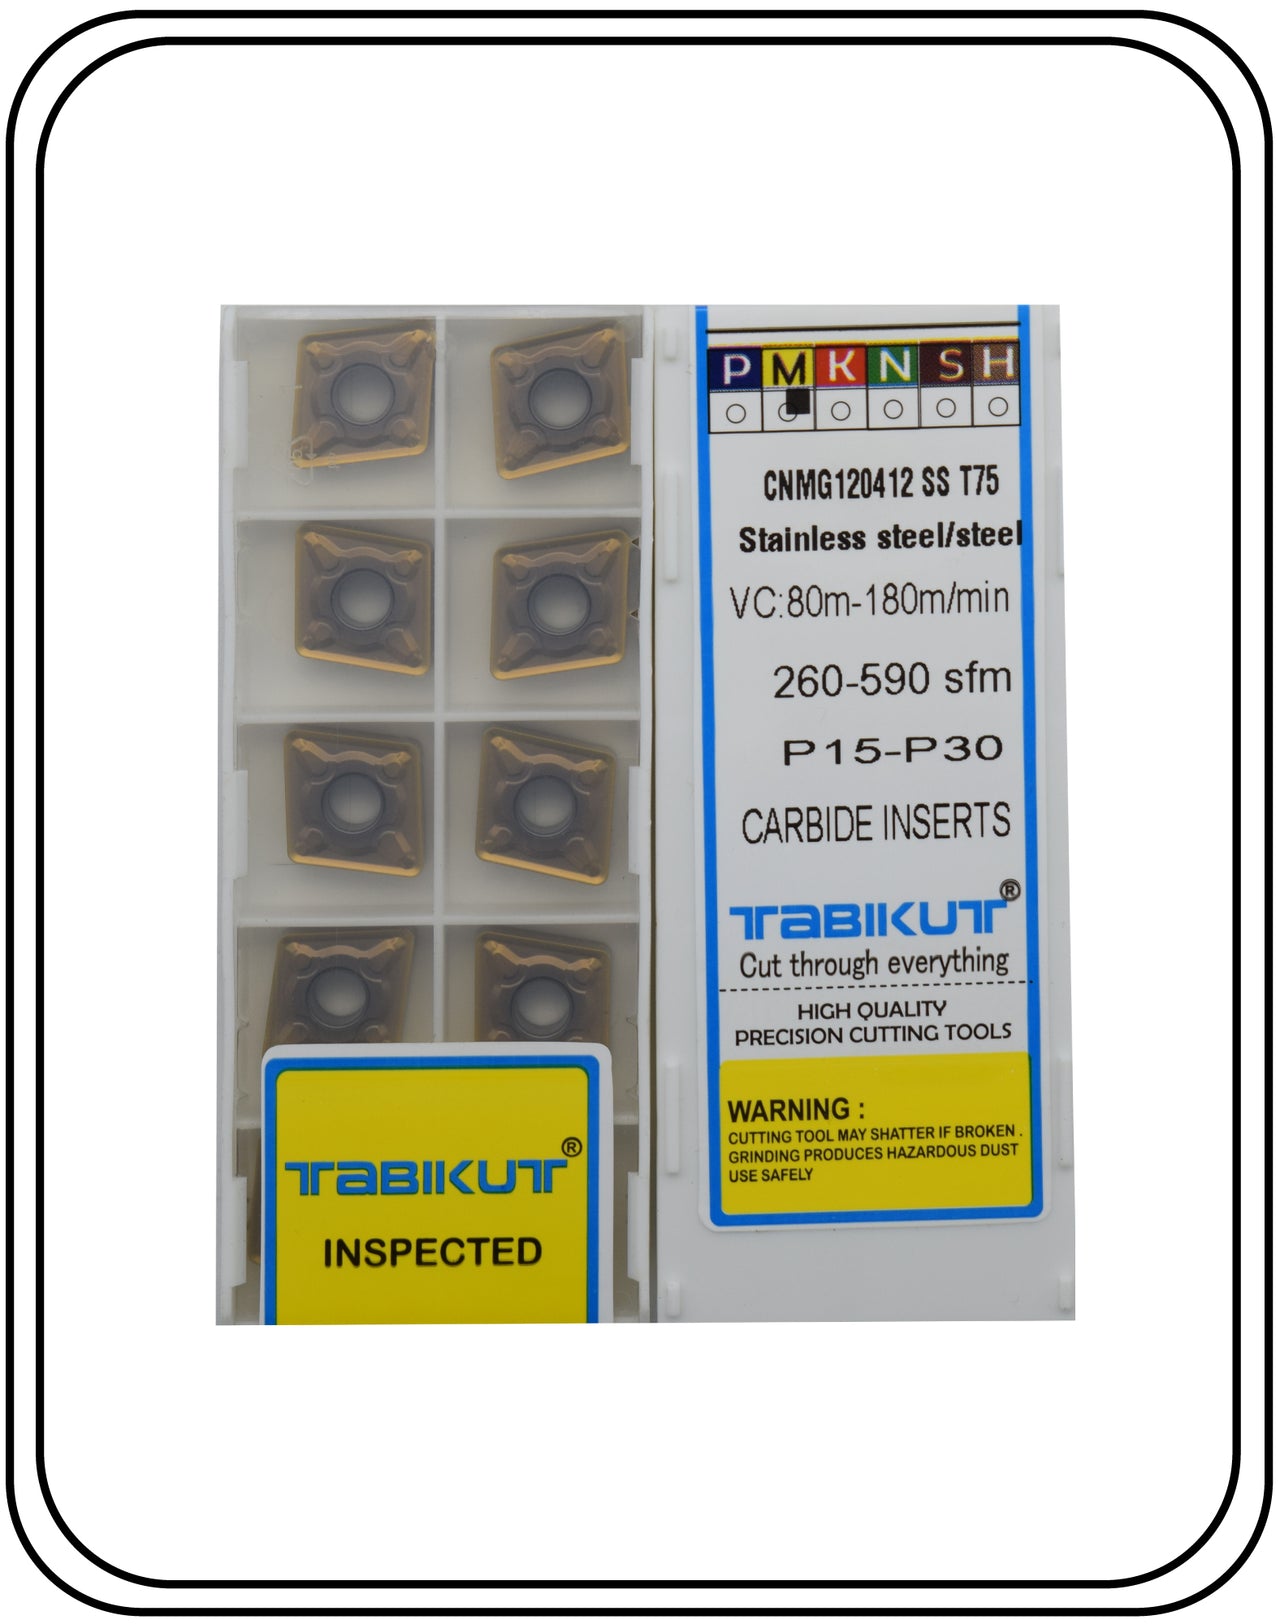 CNMG120404/08/12 specially stainless steel Tabikut carbide insert (1box) pack of 10